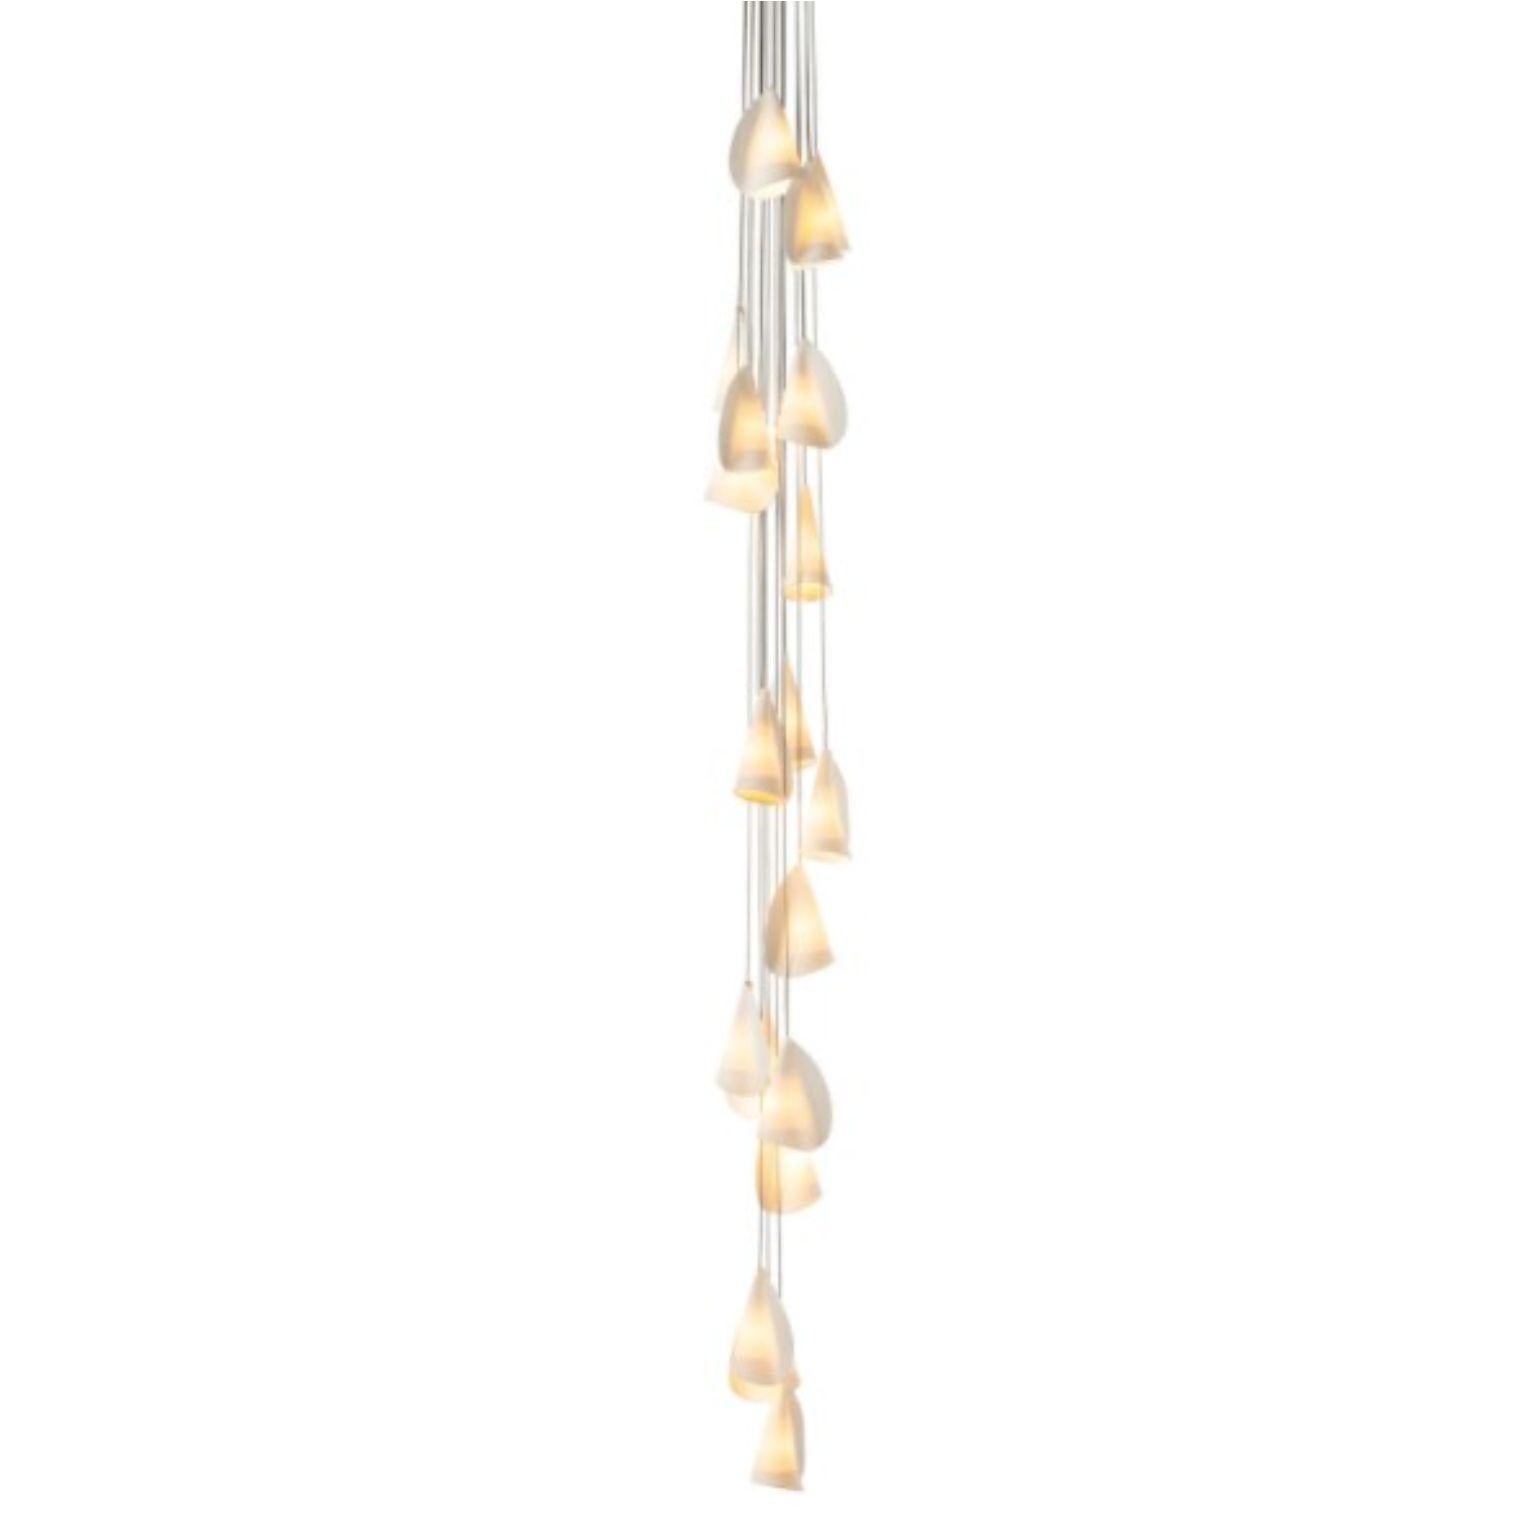 21.14 pendant by Bocci
Dimensions: D 50.1 x H 300 cm
Materials: white powder, coated square canopy
Weight:16.6kg
Also Available in different dimensions.

All our lamps can be wired according to each country. If sold to the USA it will be wired